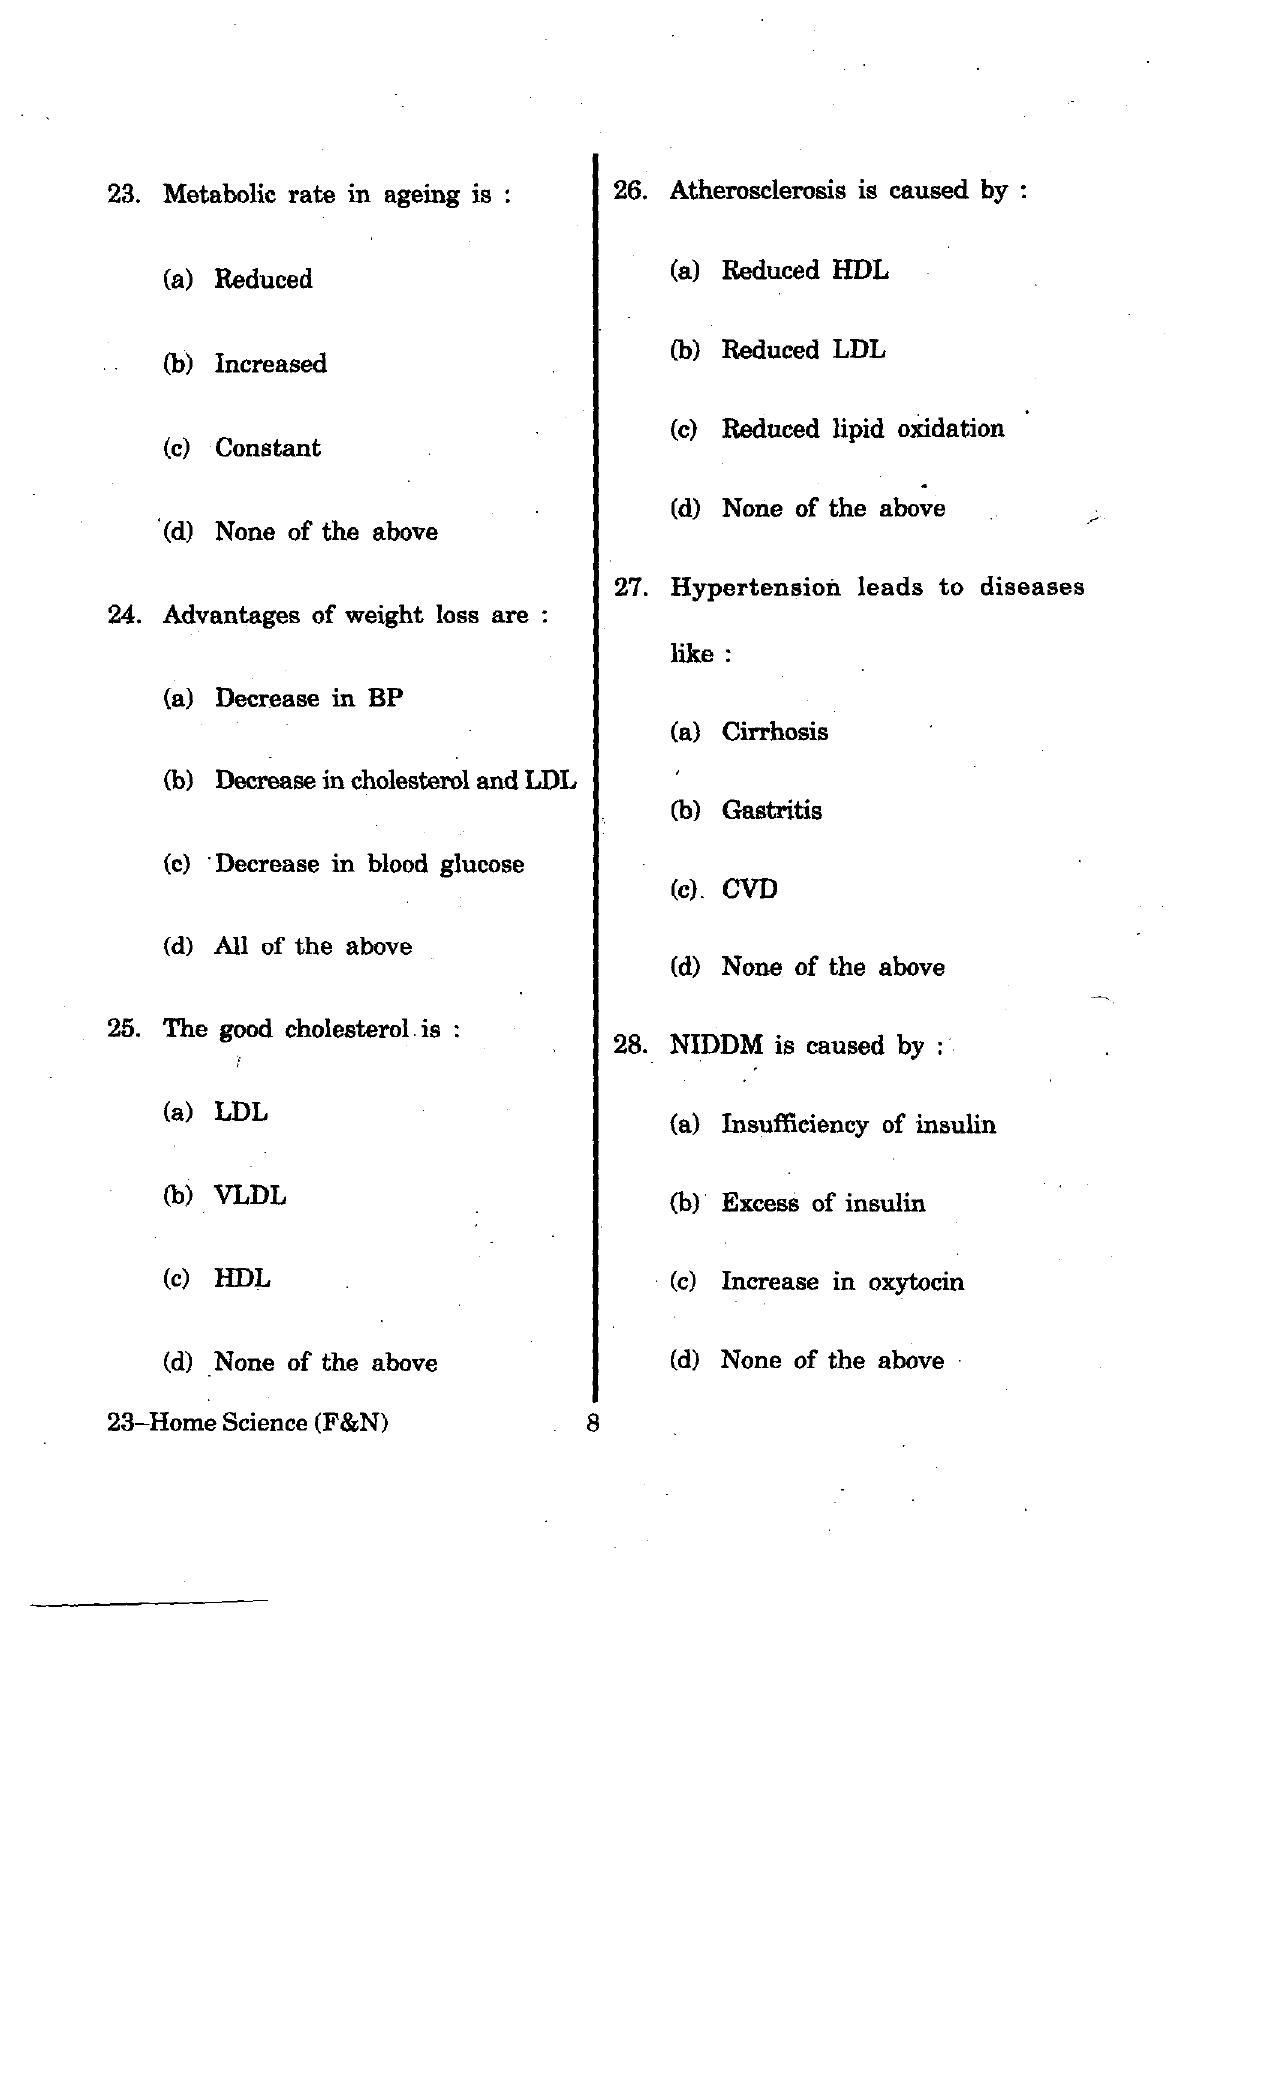 URATPG Home Science(Food & Nut.) 2012 Question Paper - Page 8